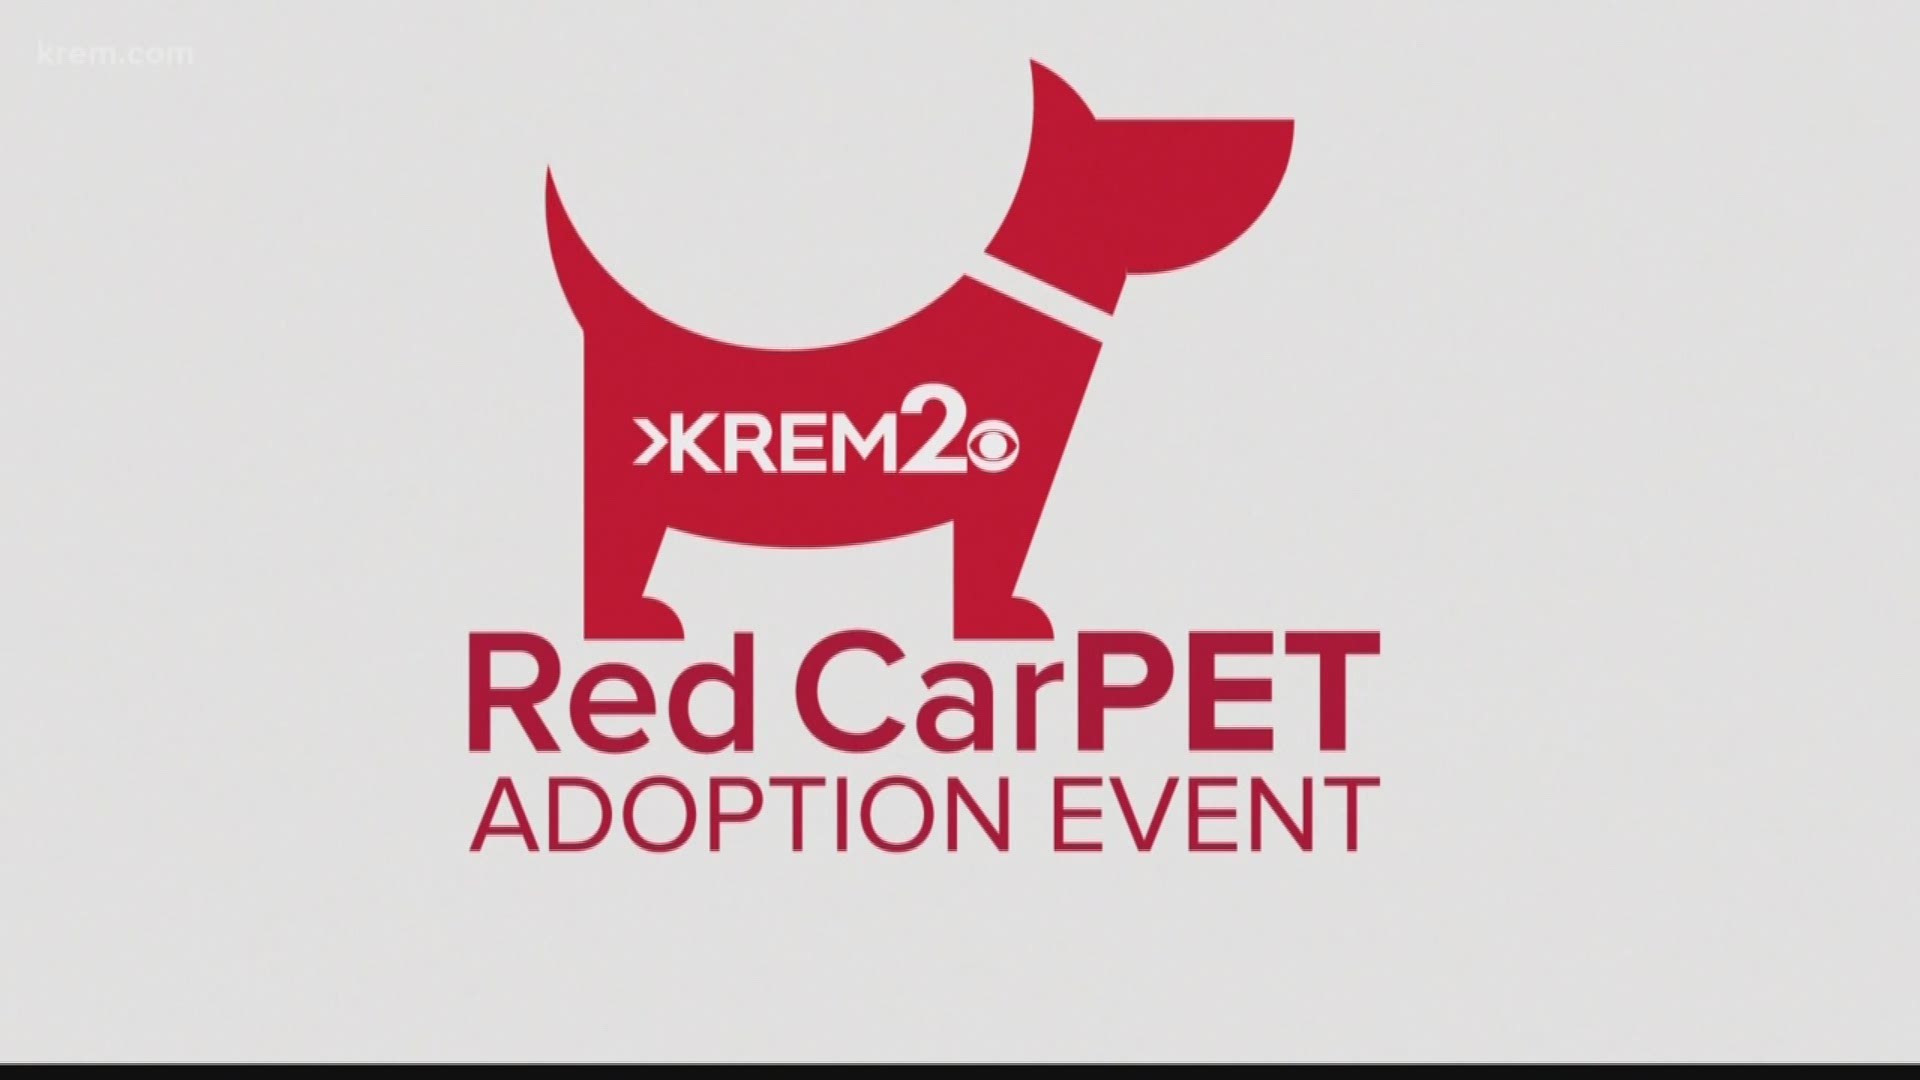 The 2020 KREM 2 Red CarPET event features dogs from local animal shelters looking for new homes.